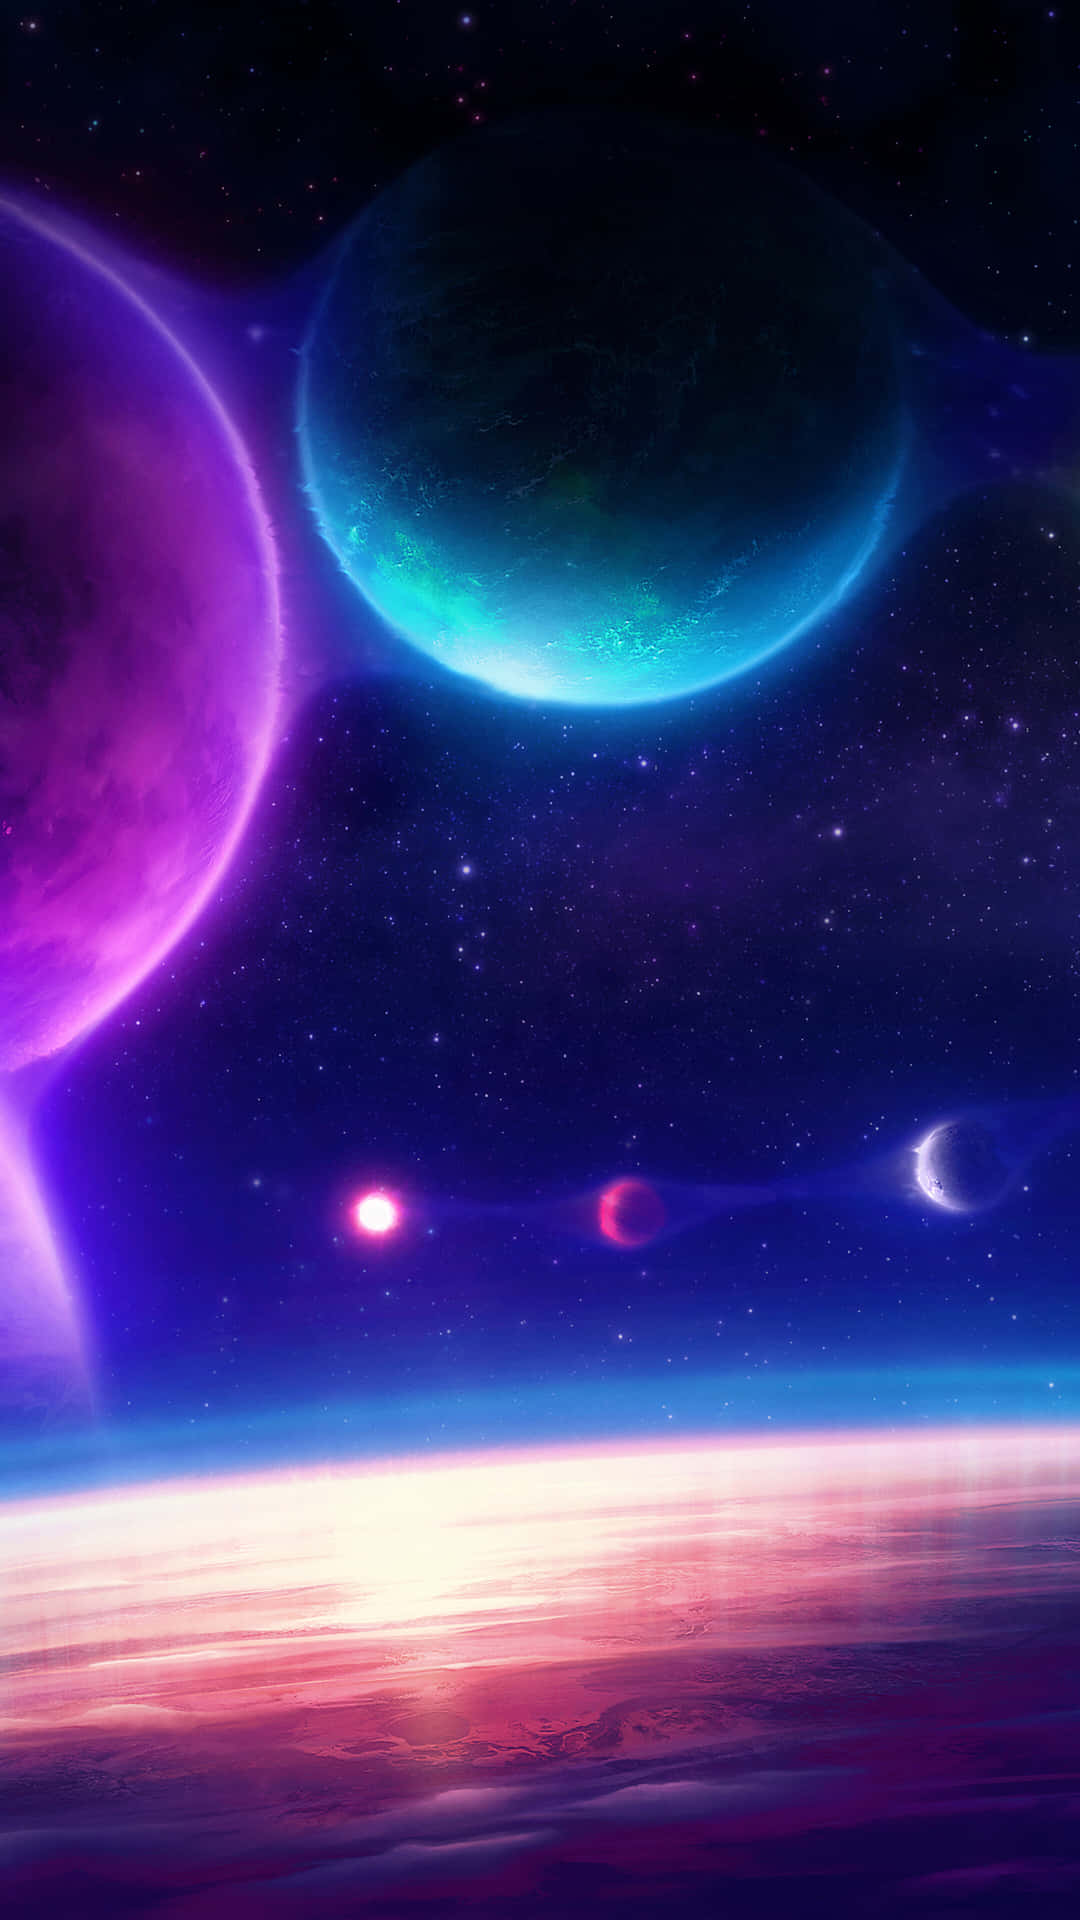 A Colorful Image Of Planets In Space